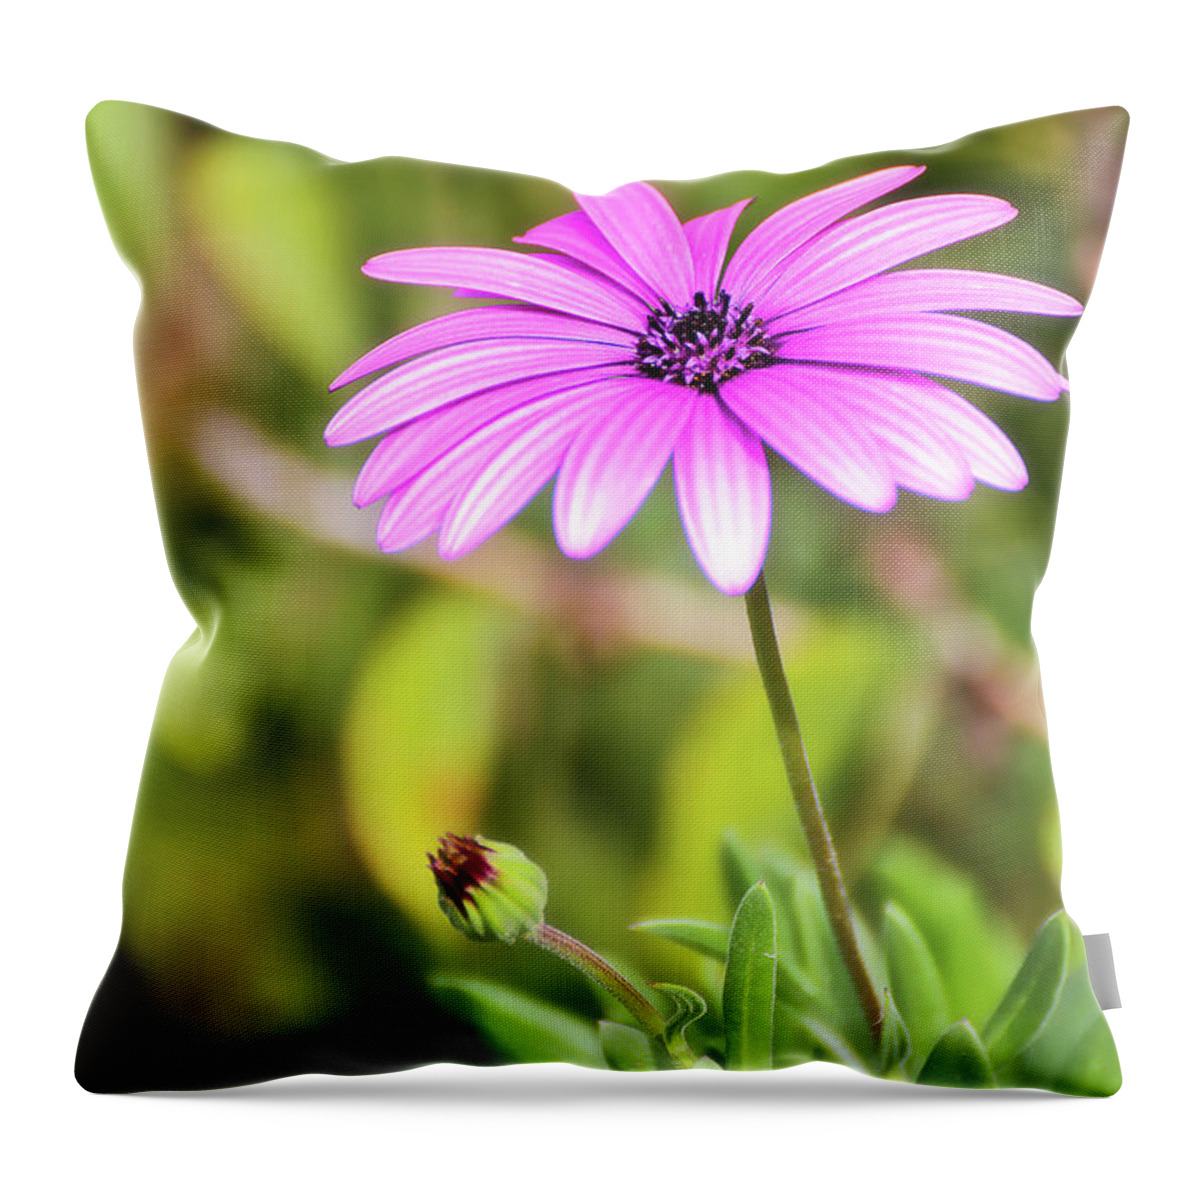 Flower Photography Throw Pillow featuring the photograph Just nature 0666 by Kevin Chippindall